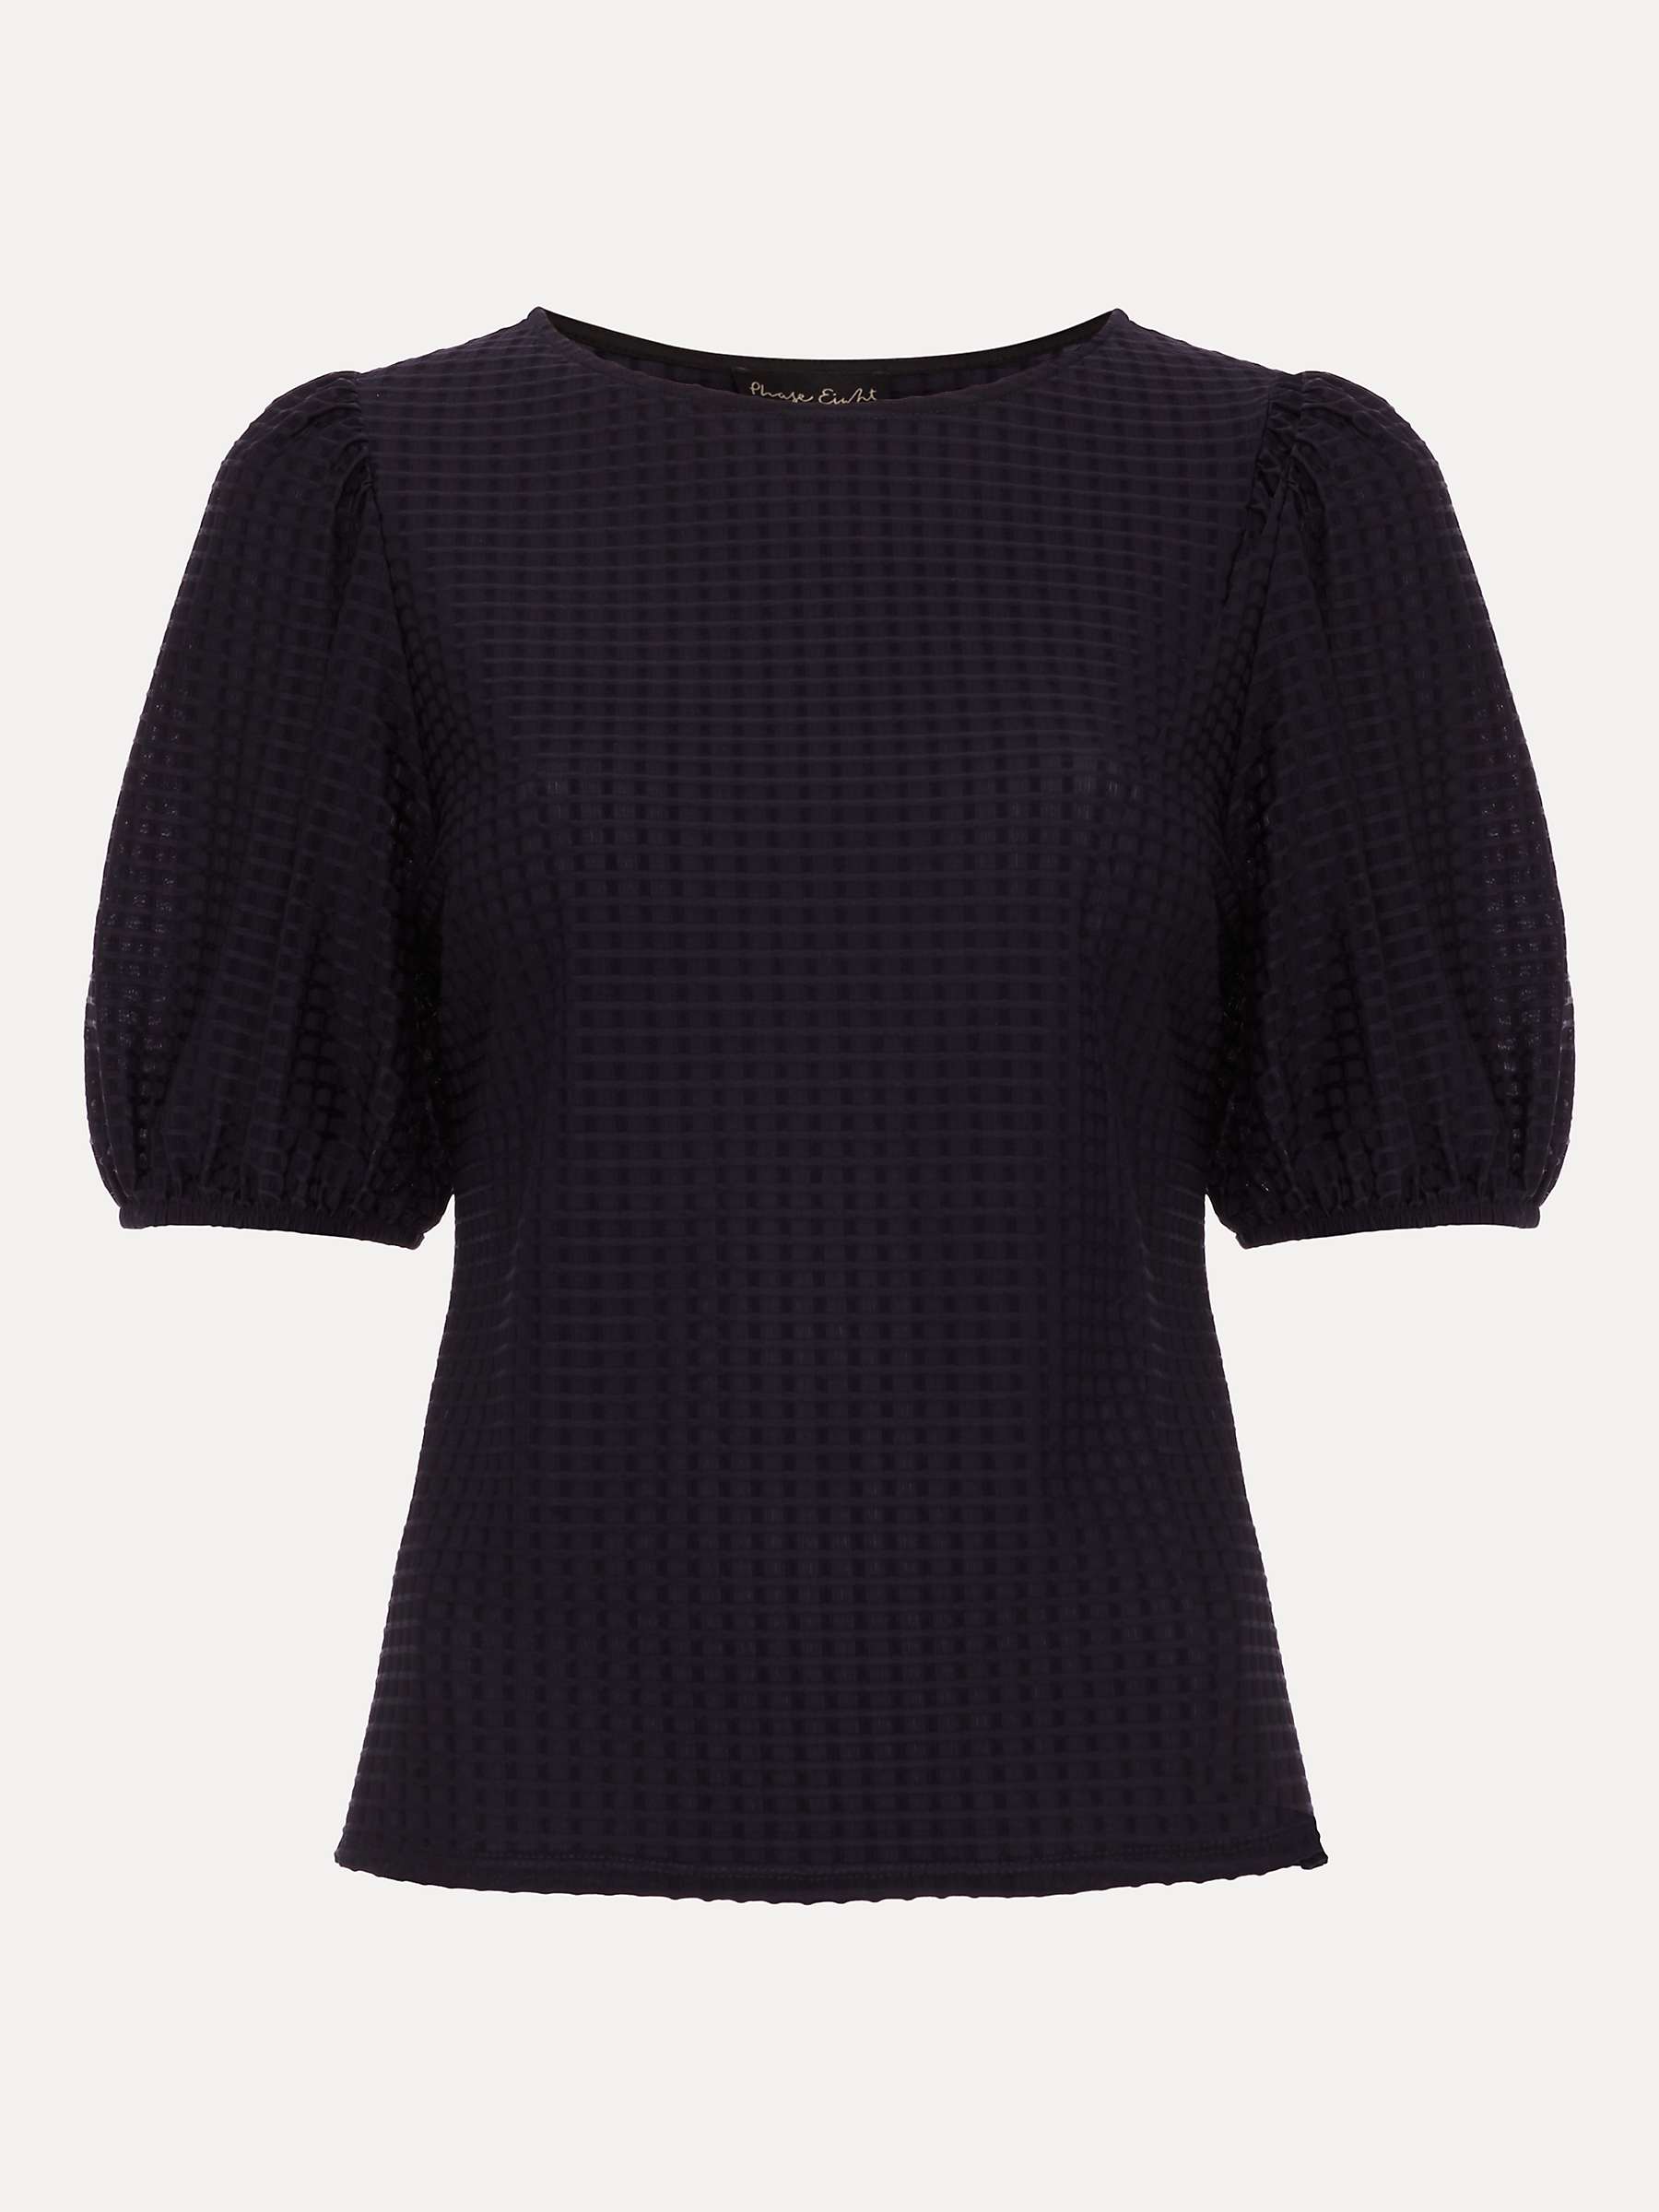 Buy Phase Eight Adley Texture Bubble Sleeve Top, Navy Online at johnlewis.com